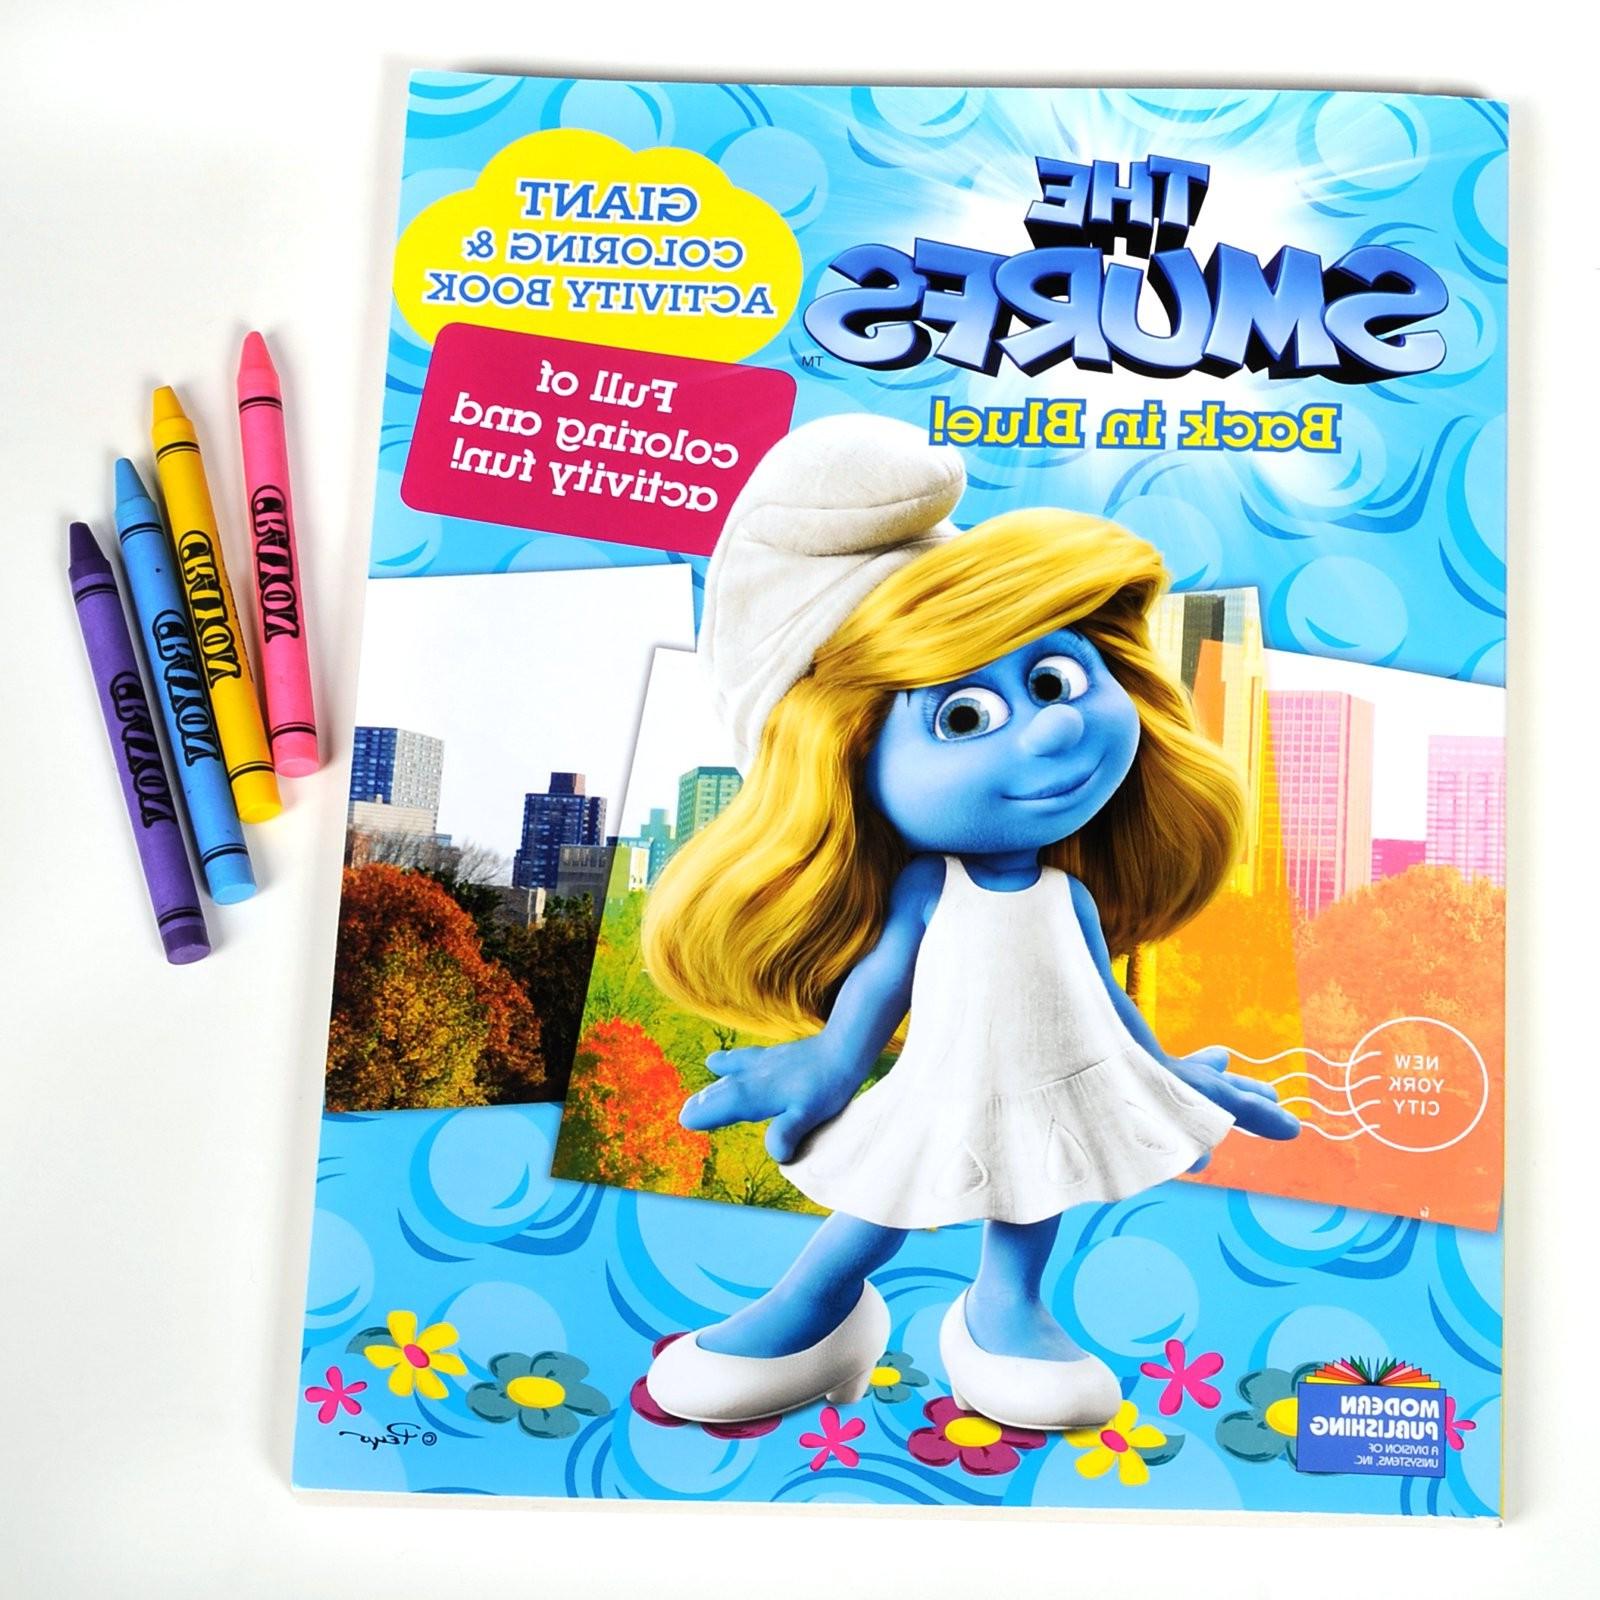 Includes coloring book with